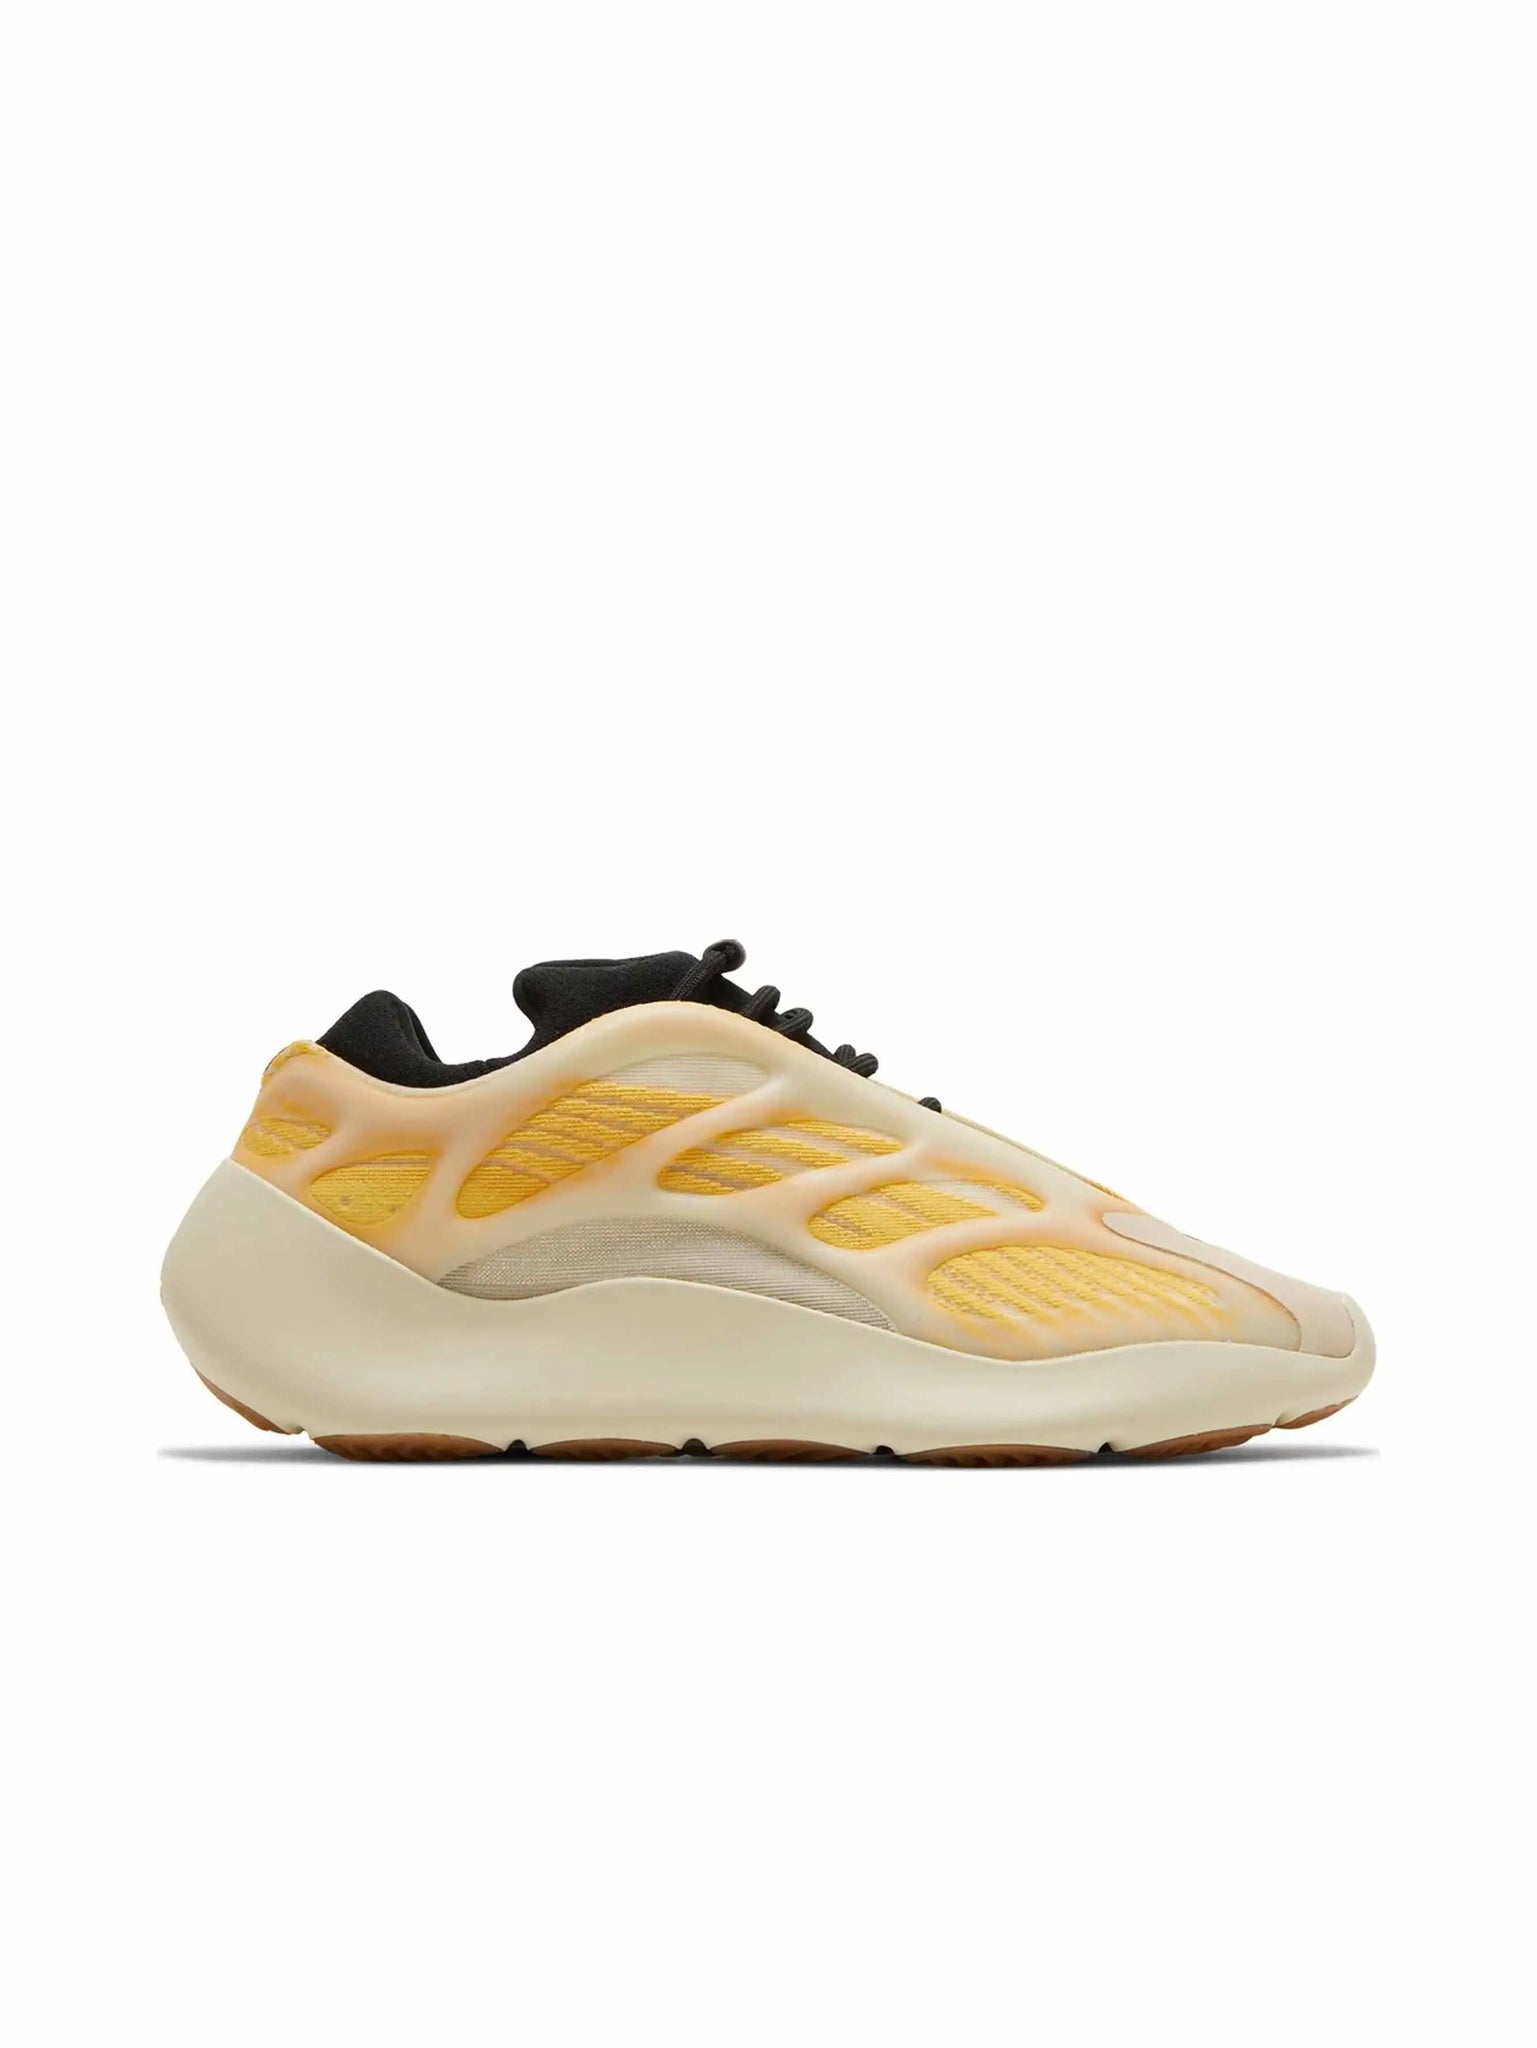 adidas Yeezy 700 V3 Mono Safflower in Auckland, New Zealand - Shop name